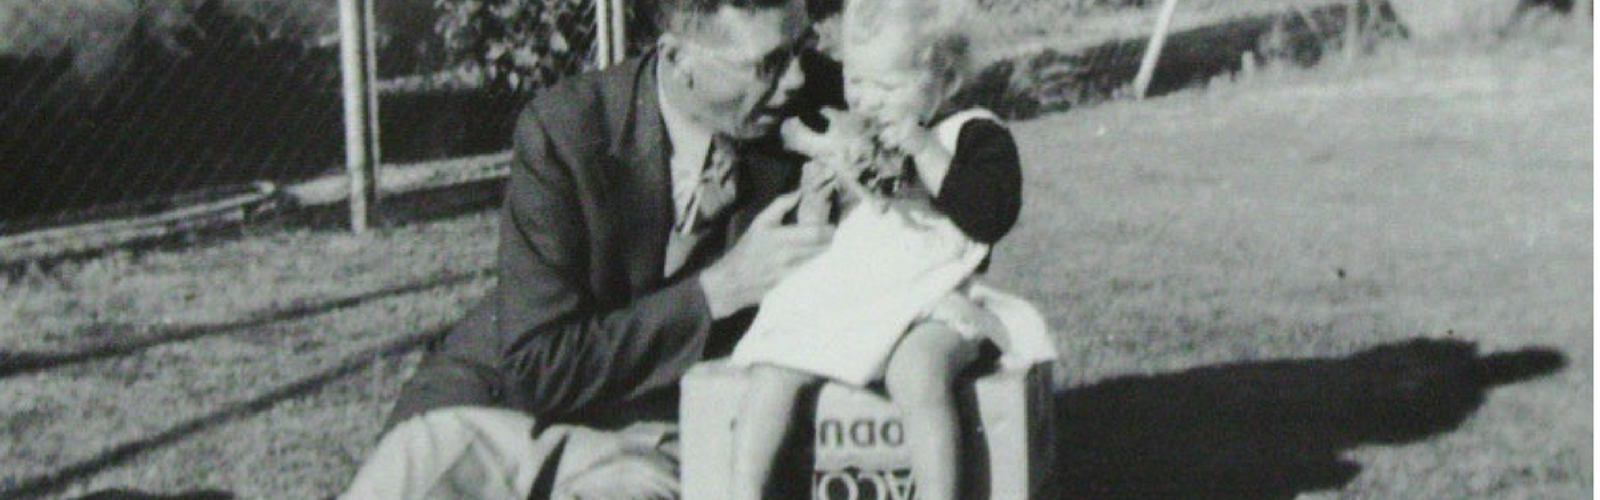 alf traeger and young dughter approx 1940s